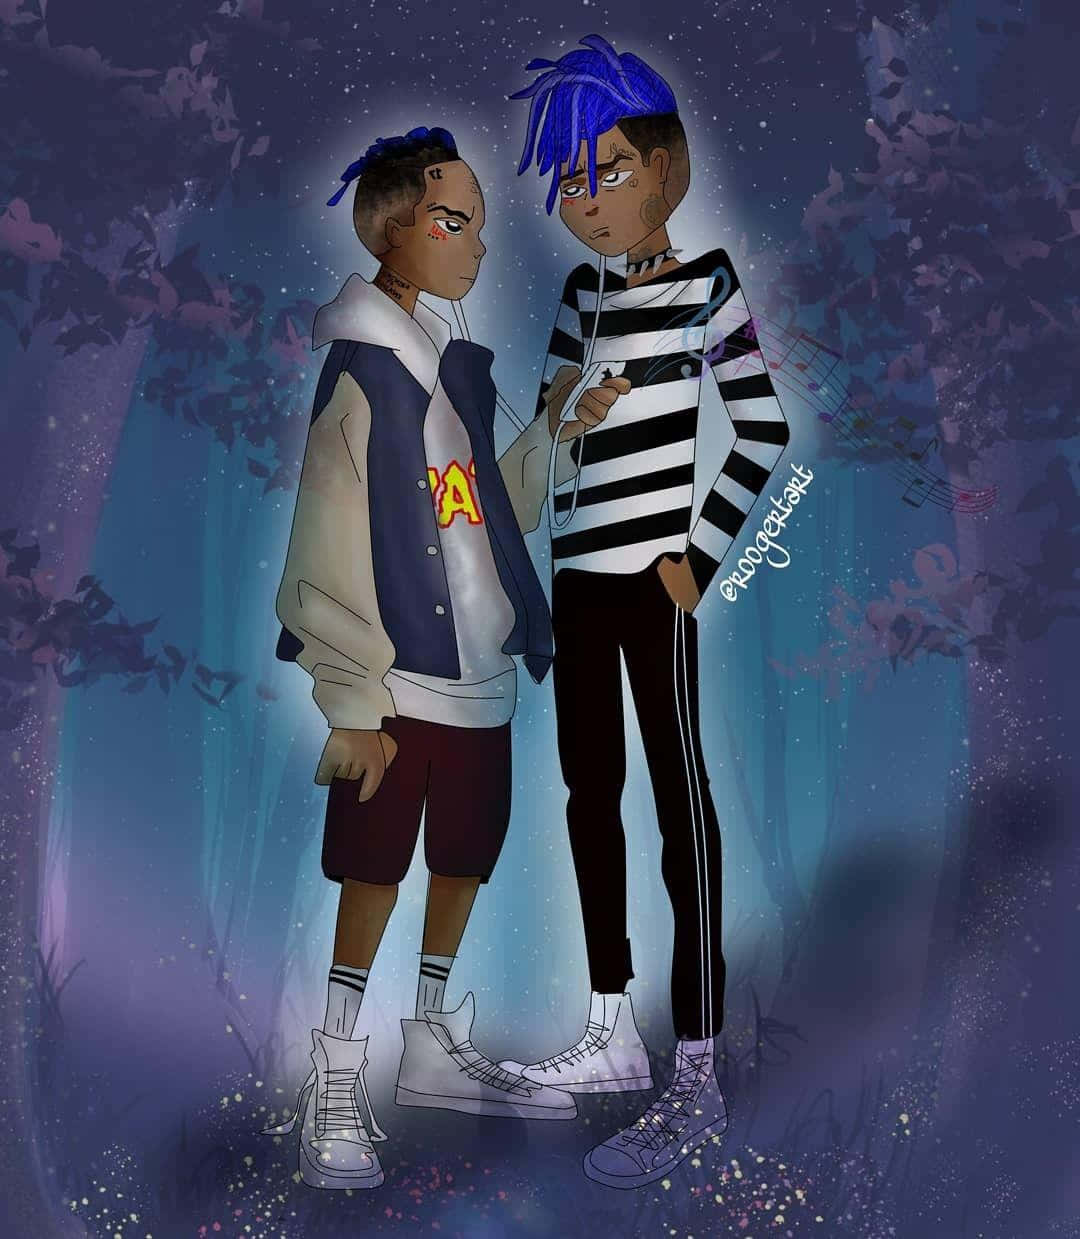 Xxxtentacion And Juice Wrld Bring The Heat In Their Hit Collaboration. Background